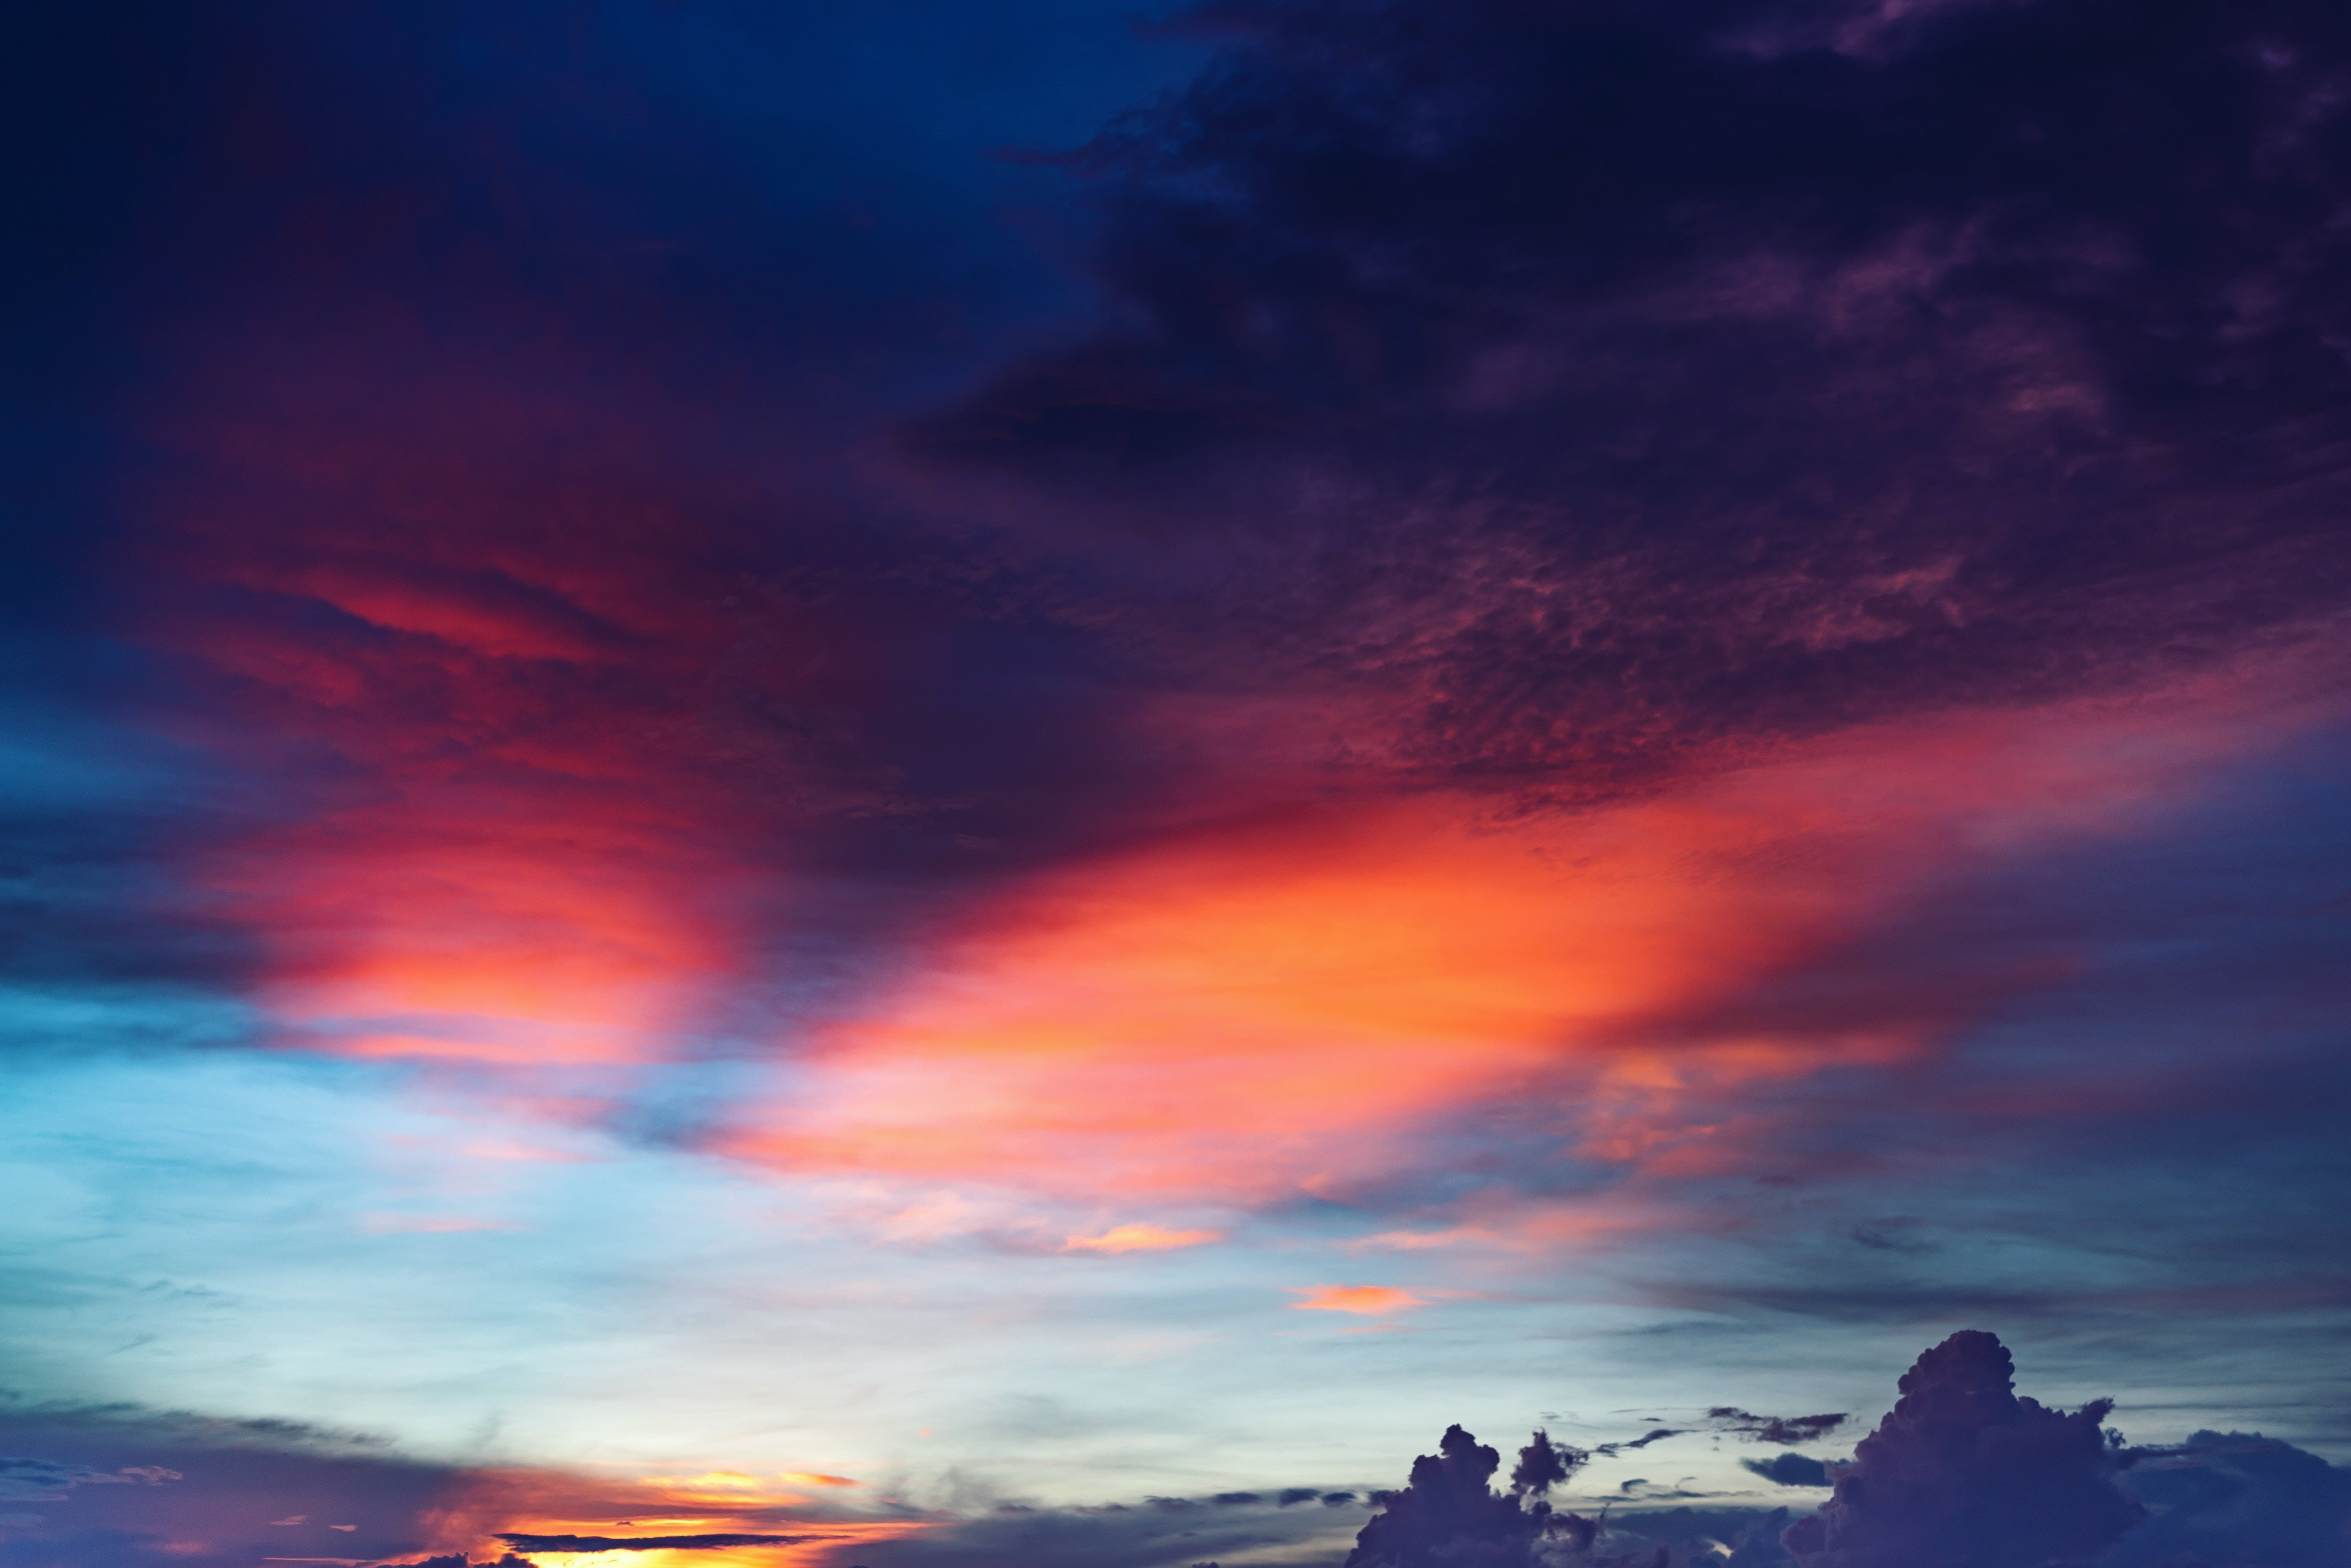 red and white clouds, sky, sunset, mountains, landscape, cloud - sky